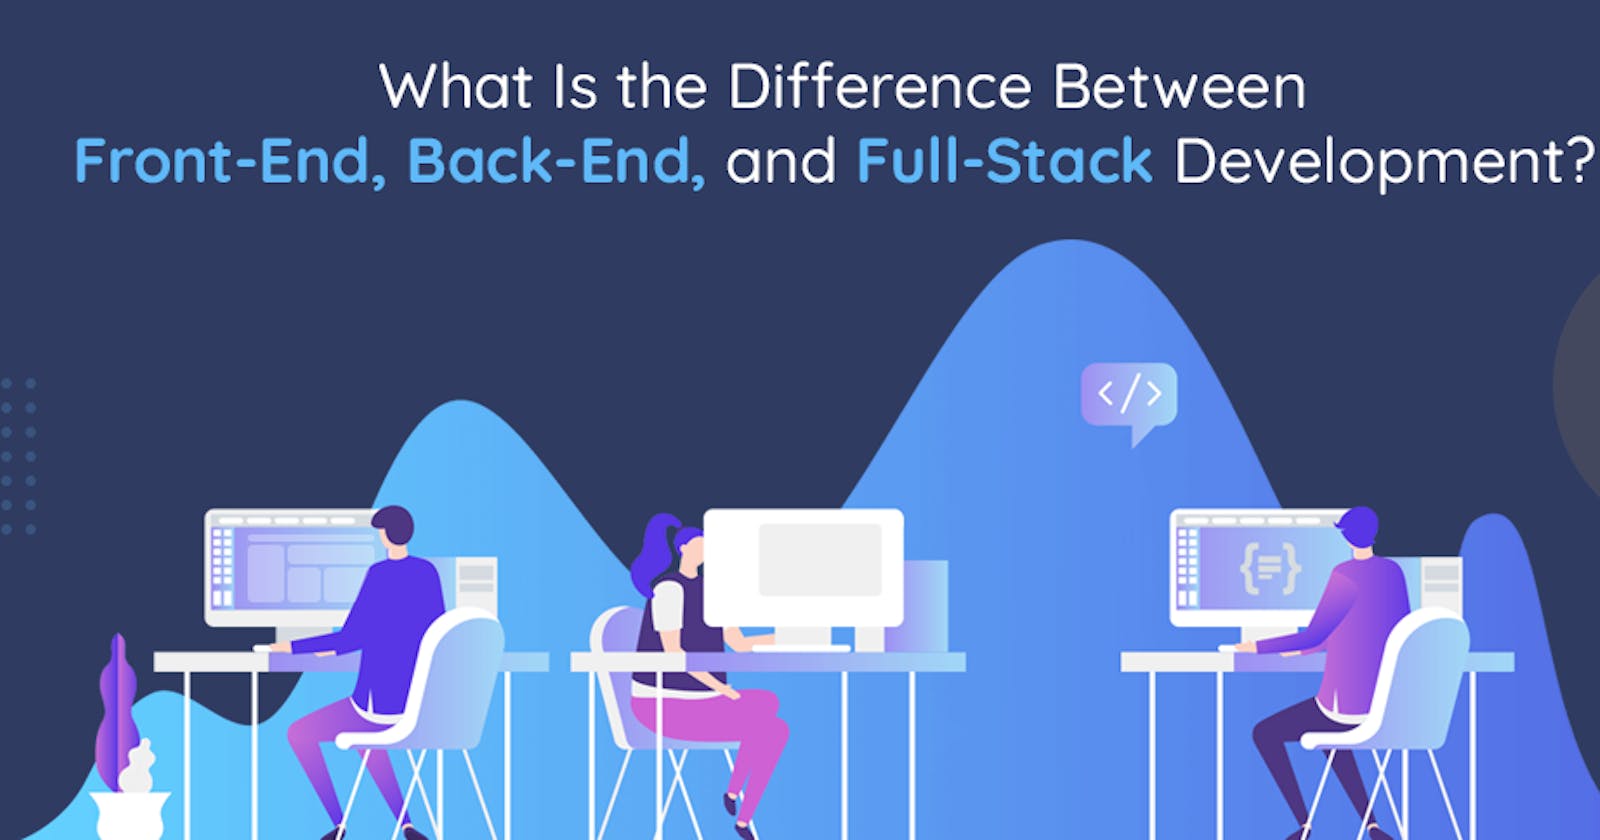 What Is the Difference Between Front-End, Back-End, and Full-Stack Development?